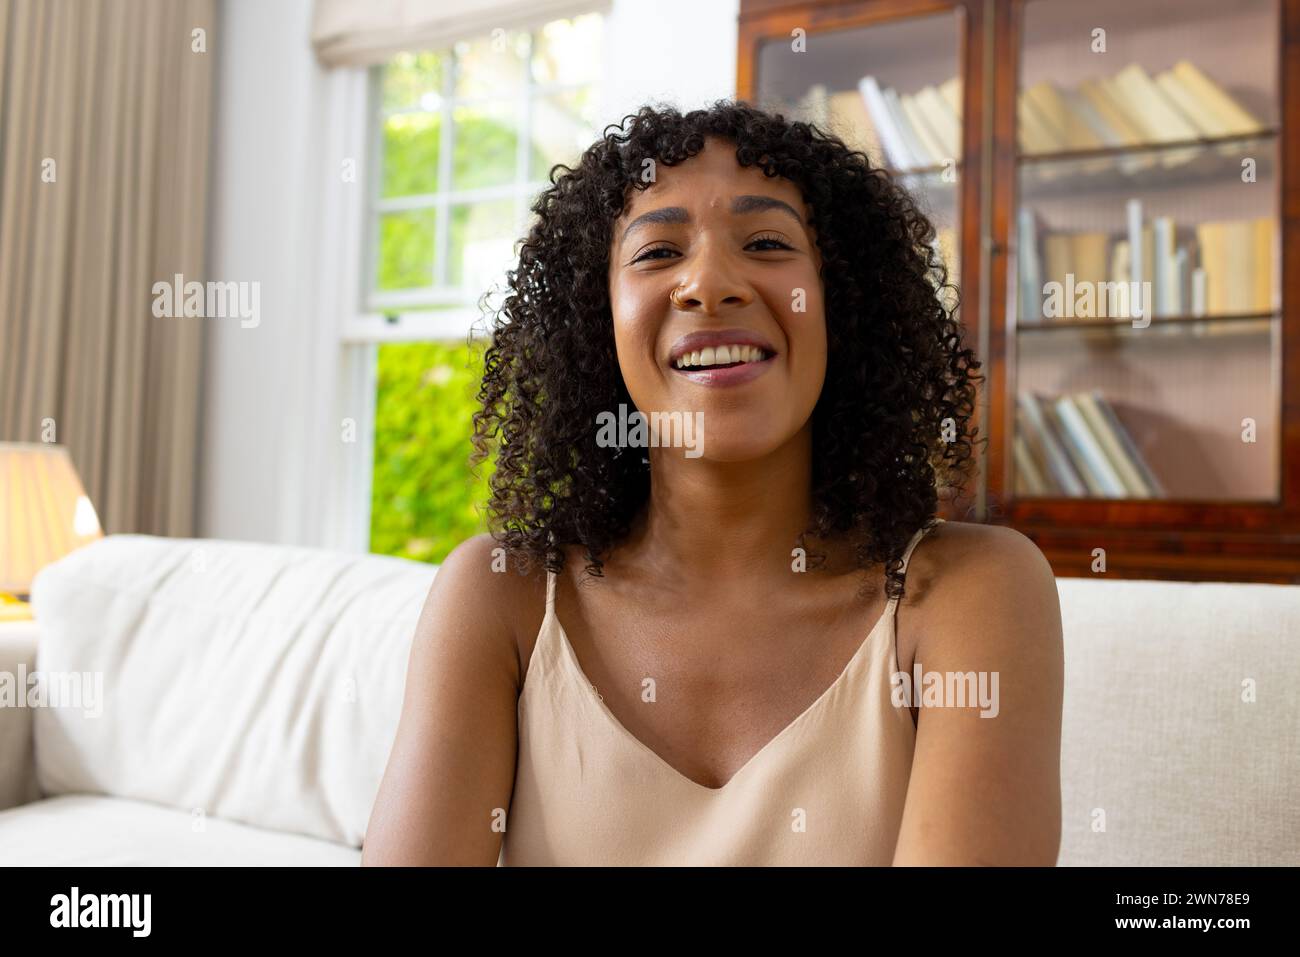 Young biracial woman with curly hair smiles warmly on a video call, seated on a white sofa Stock Photo